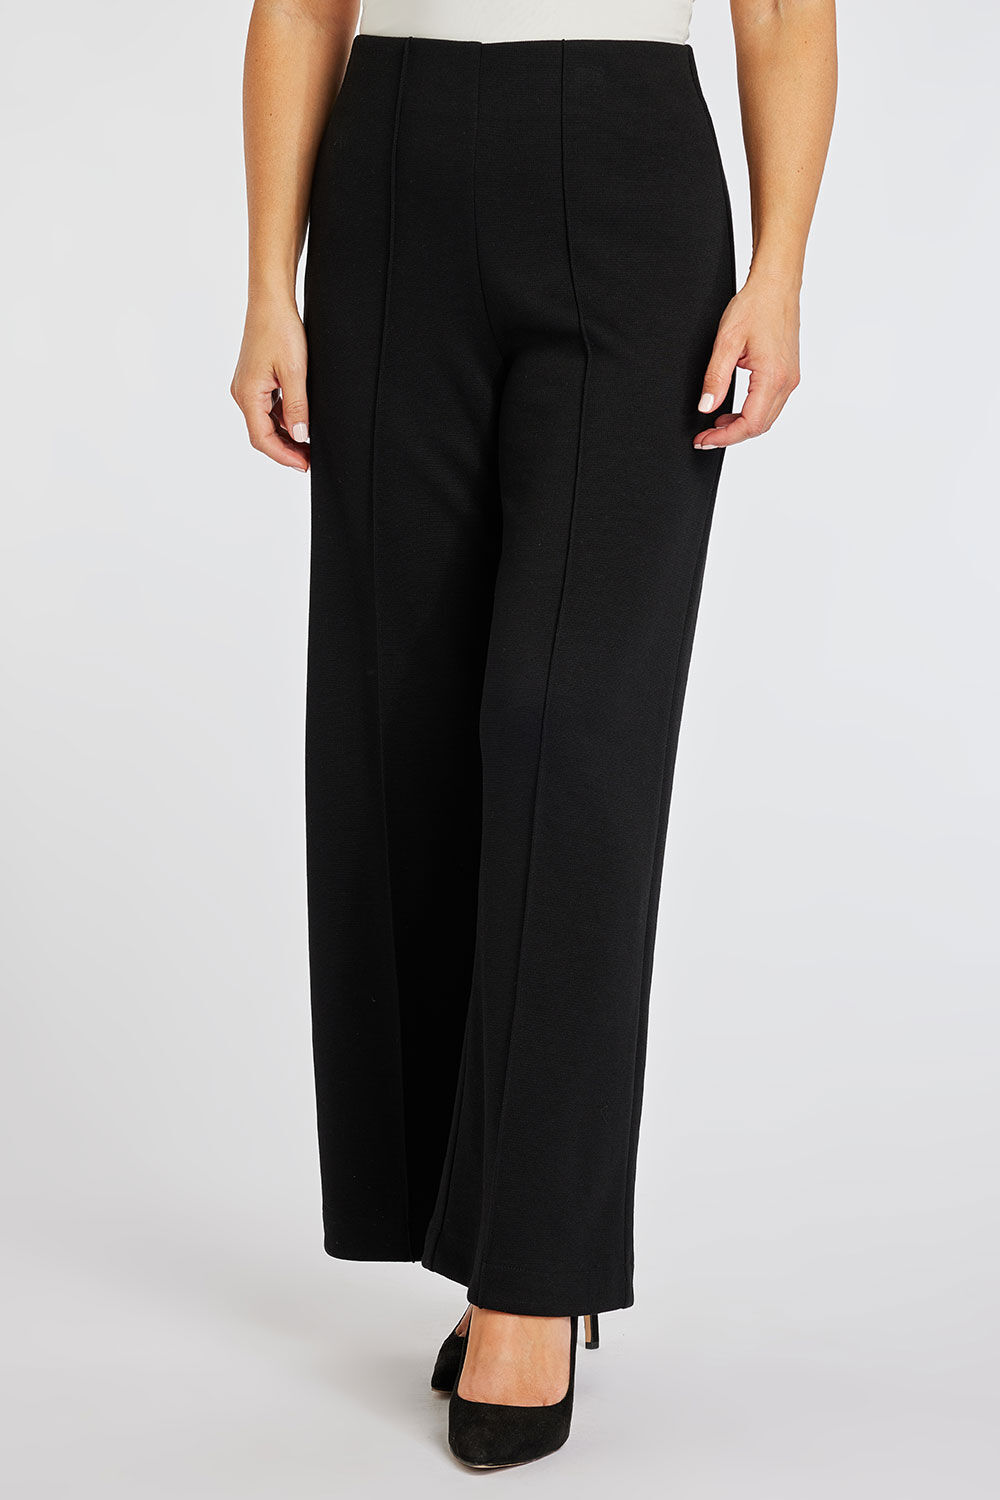 Pleat Front Trouser | Seed Heritage